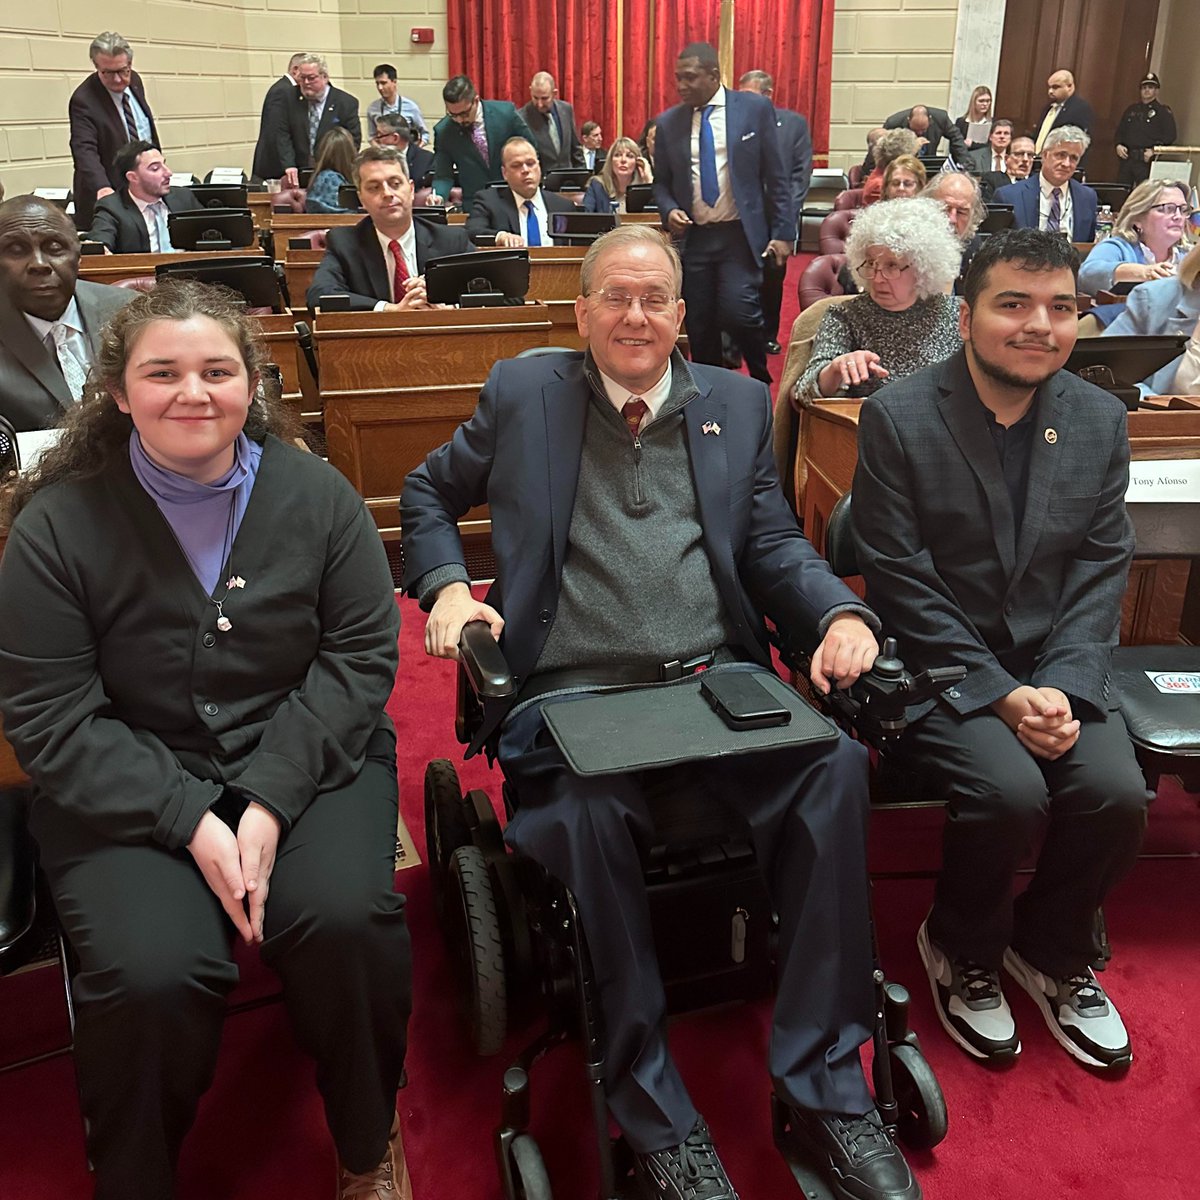 We are proud to be represented by our students Jillian and Nygel at @GovDanMcKee's State of the State. Rhode Island's important investments are building our cybersecurity workforce, who will in turn support local businesses, municipalities and our national security.